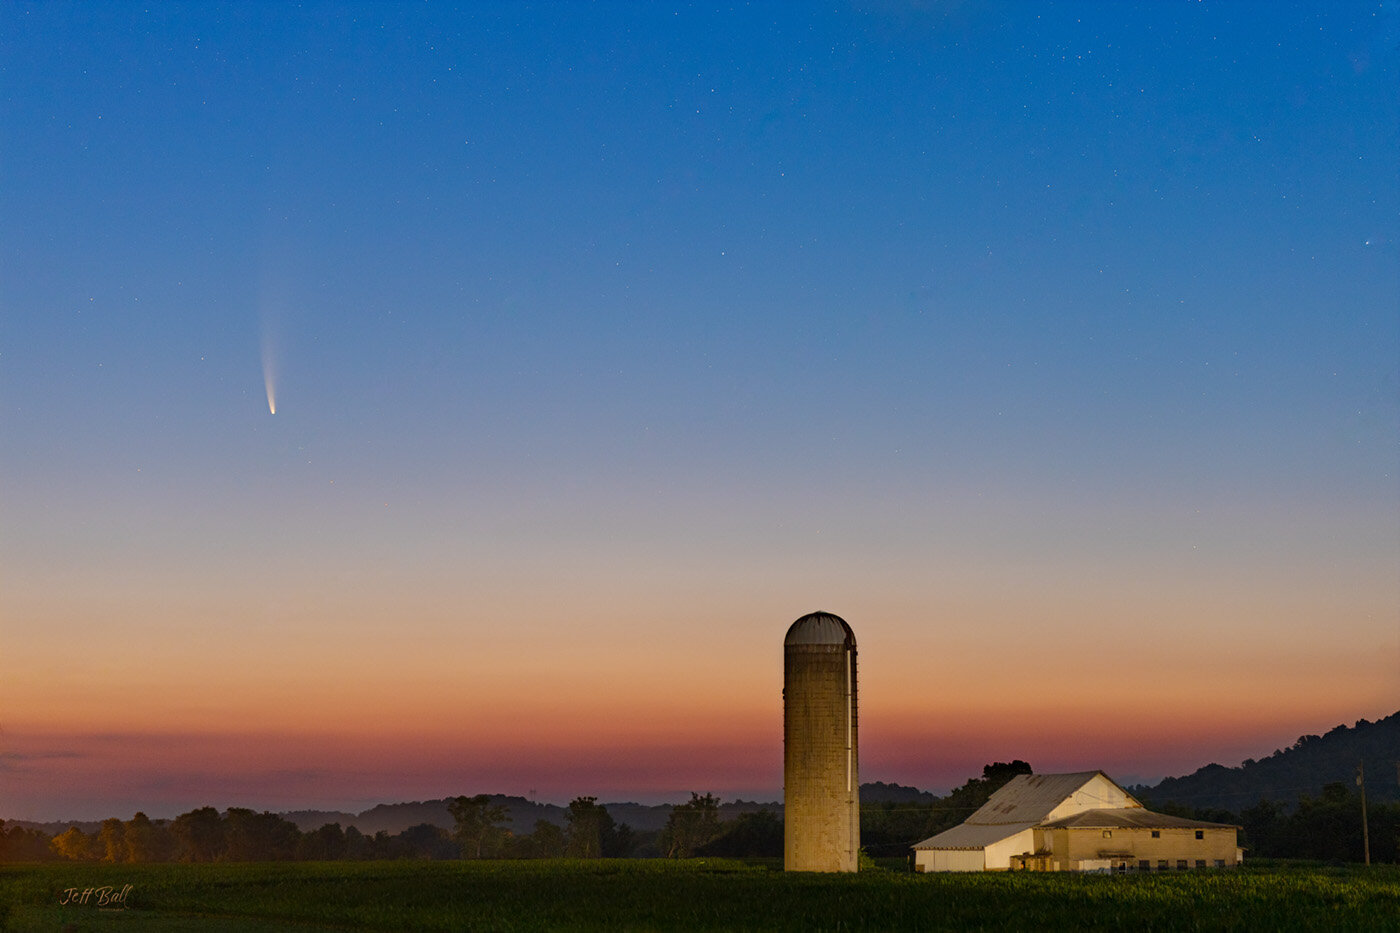  Comet Neowise over Gallia County Farm on the Ohio River.  July 10, 2020 